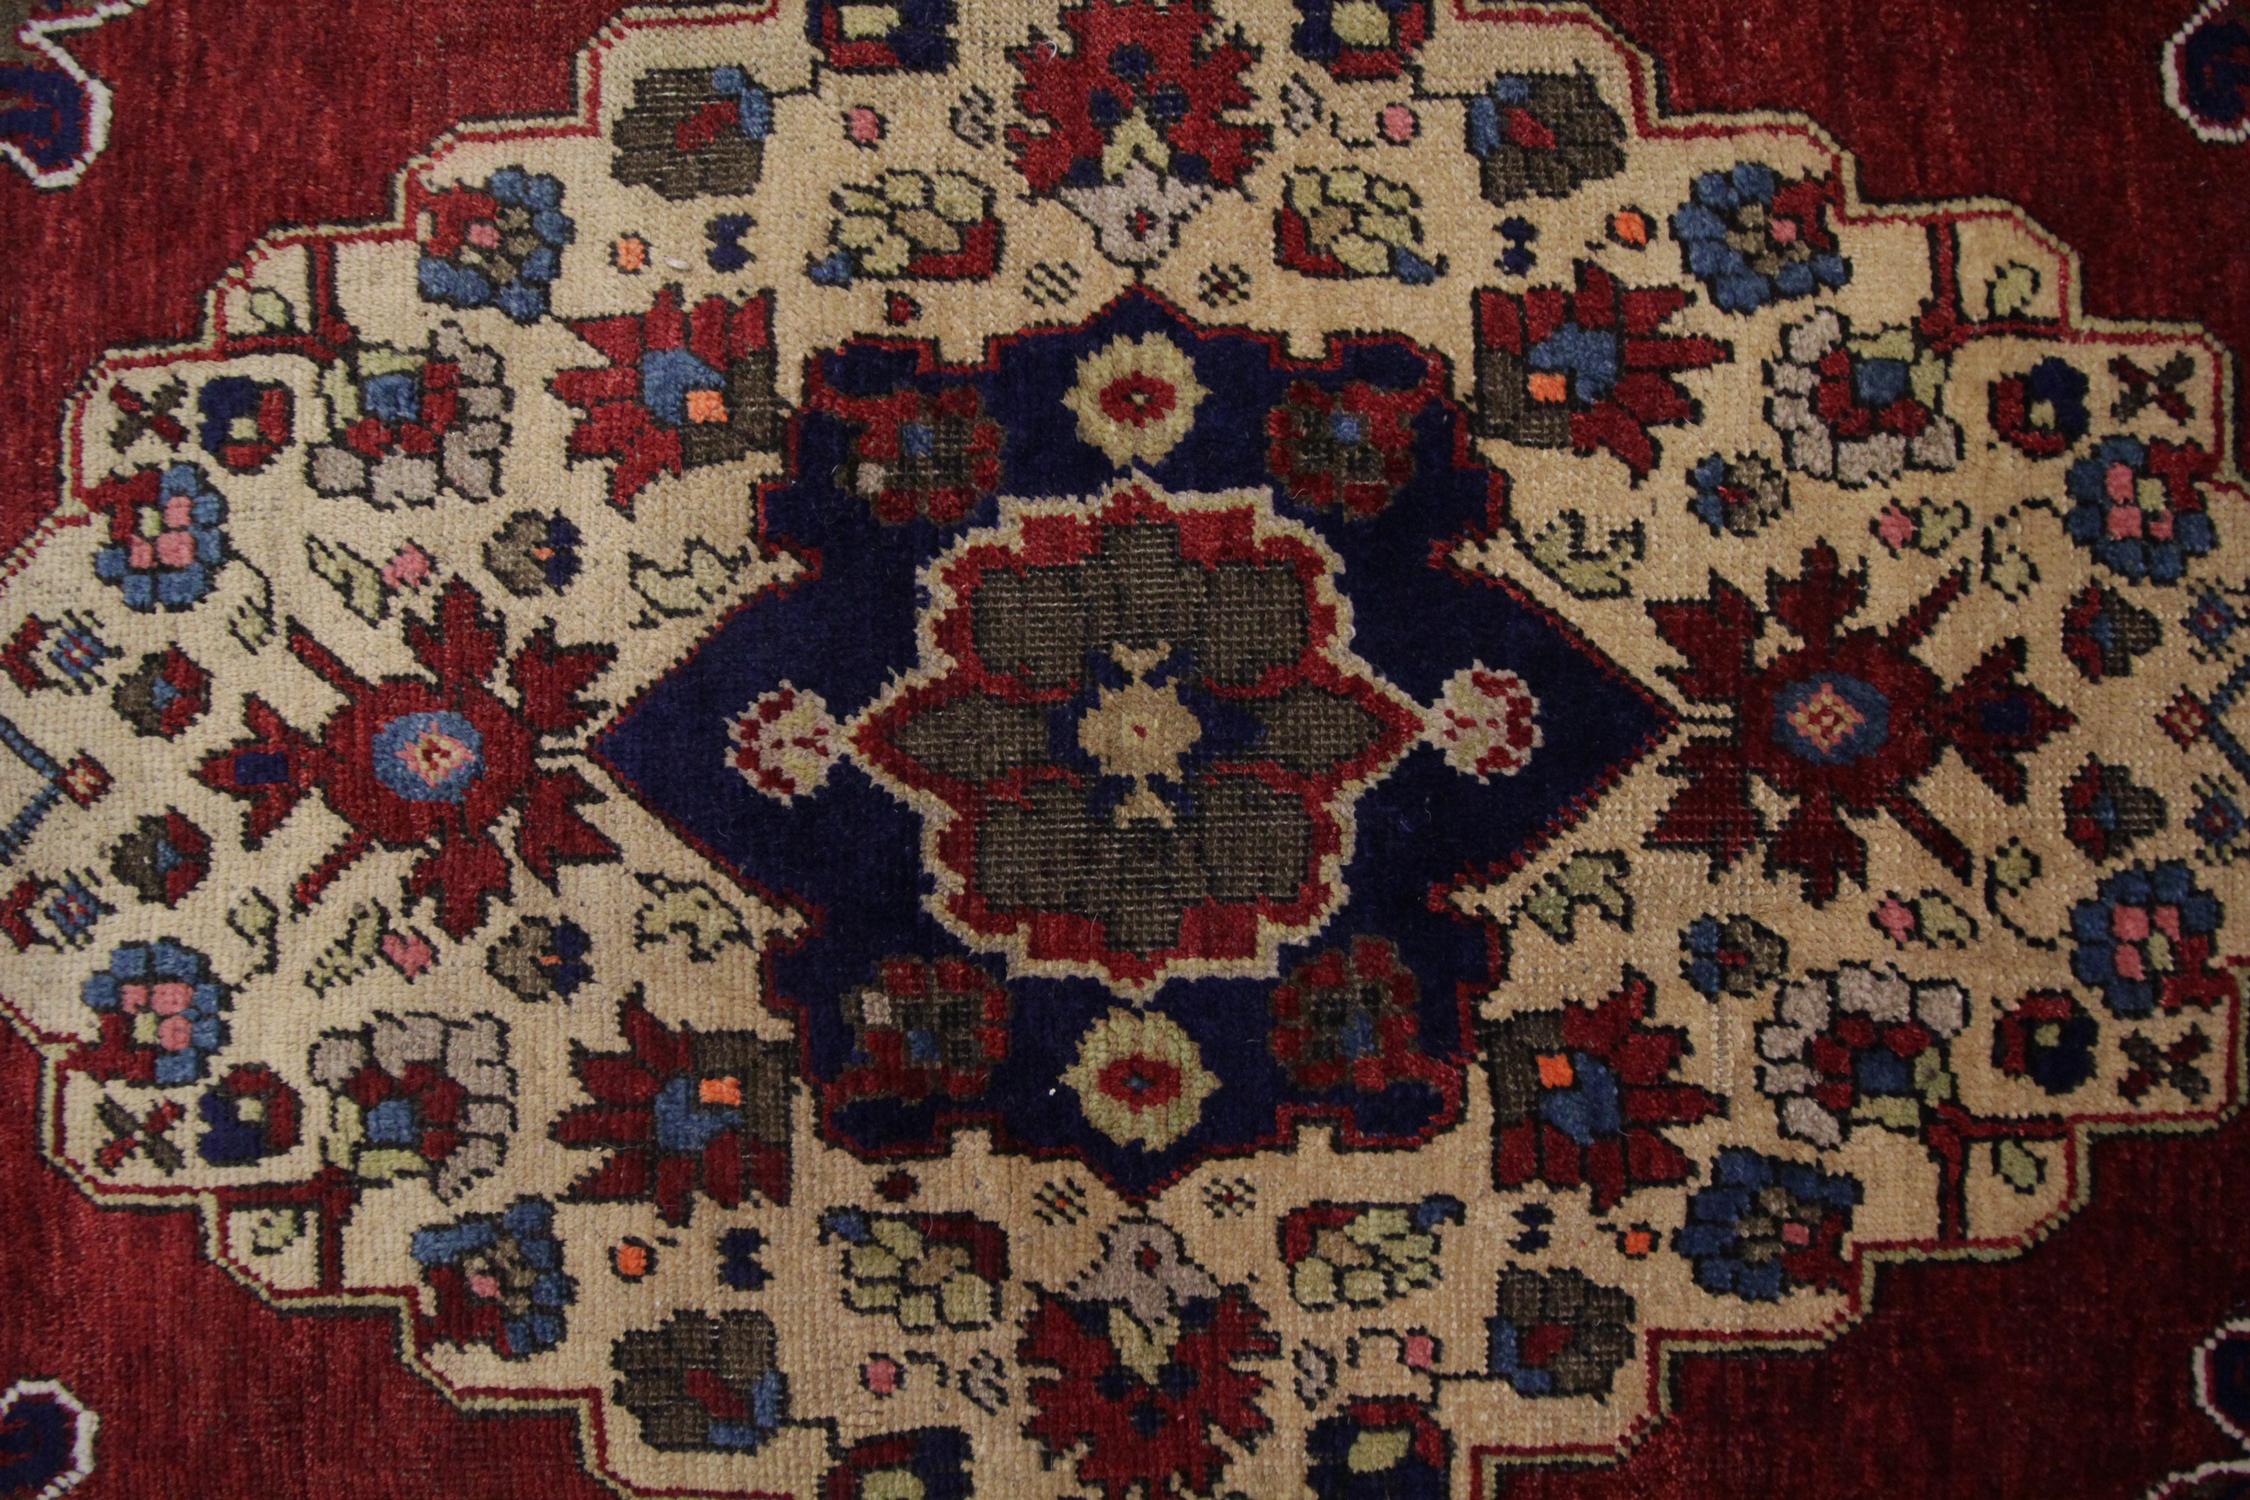 Blue Antique Rug Turkish Living Room Rug, Floral Design Red Wool Carpet for Sale In Excellent Condition For Sale In Hampshire, GB